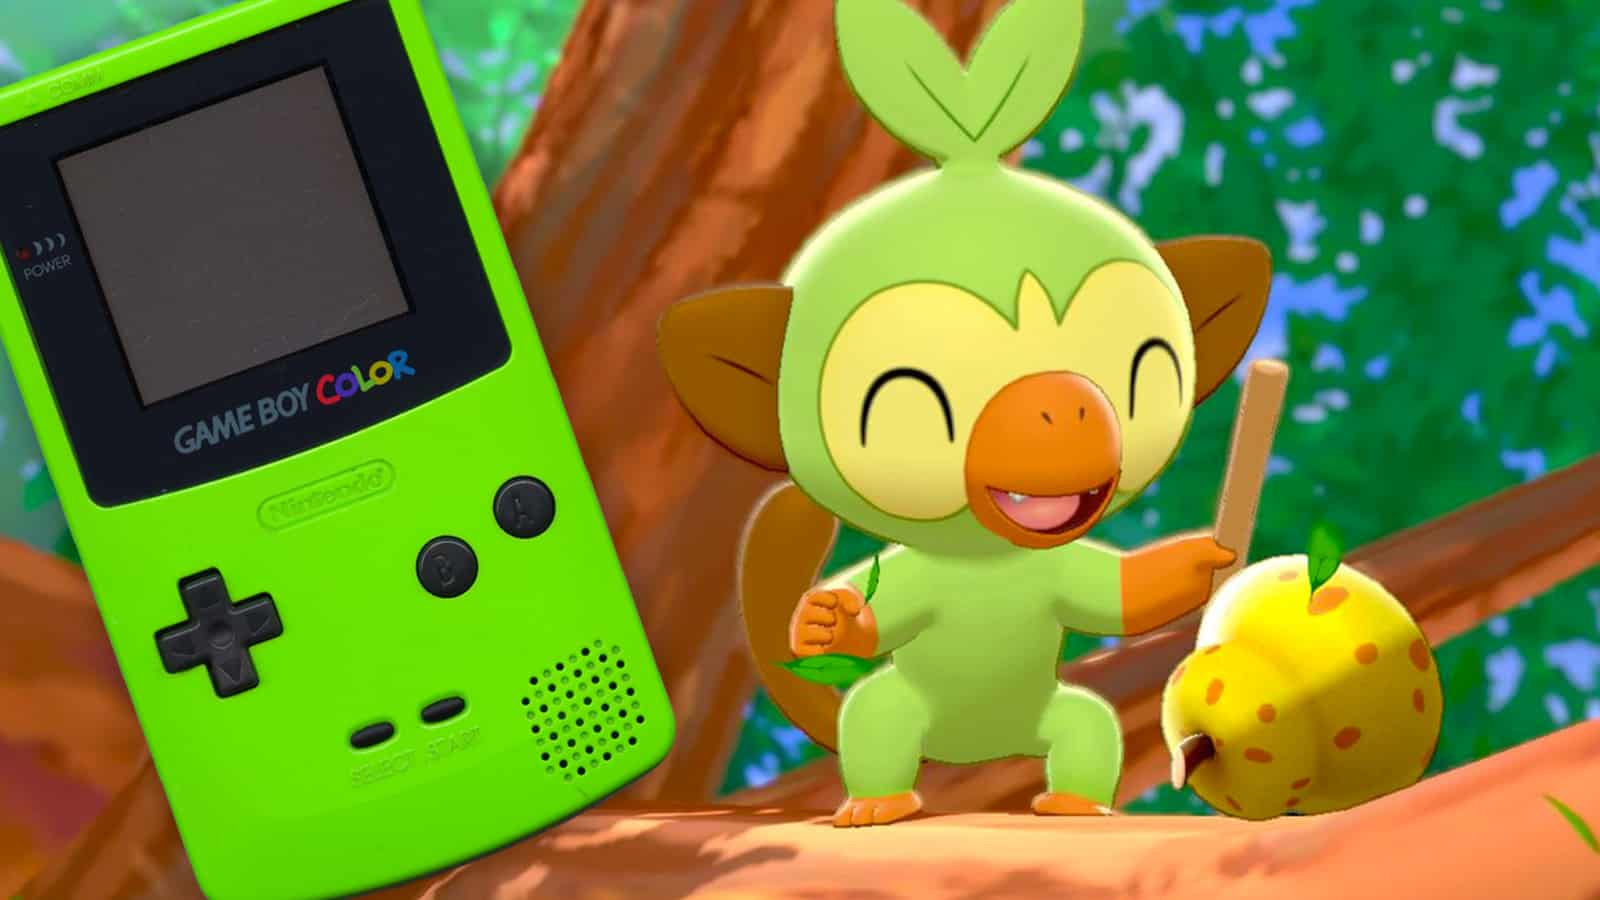 Pokemon Sword and Shield recreated for the Game Boy Color